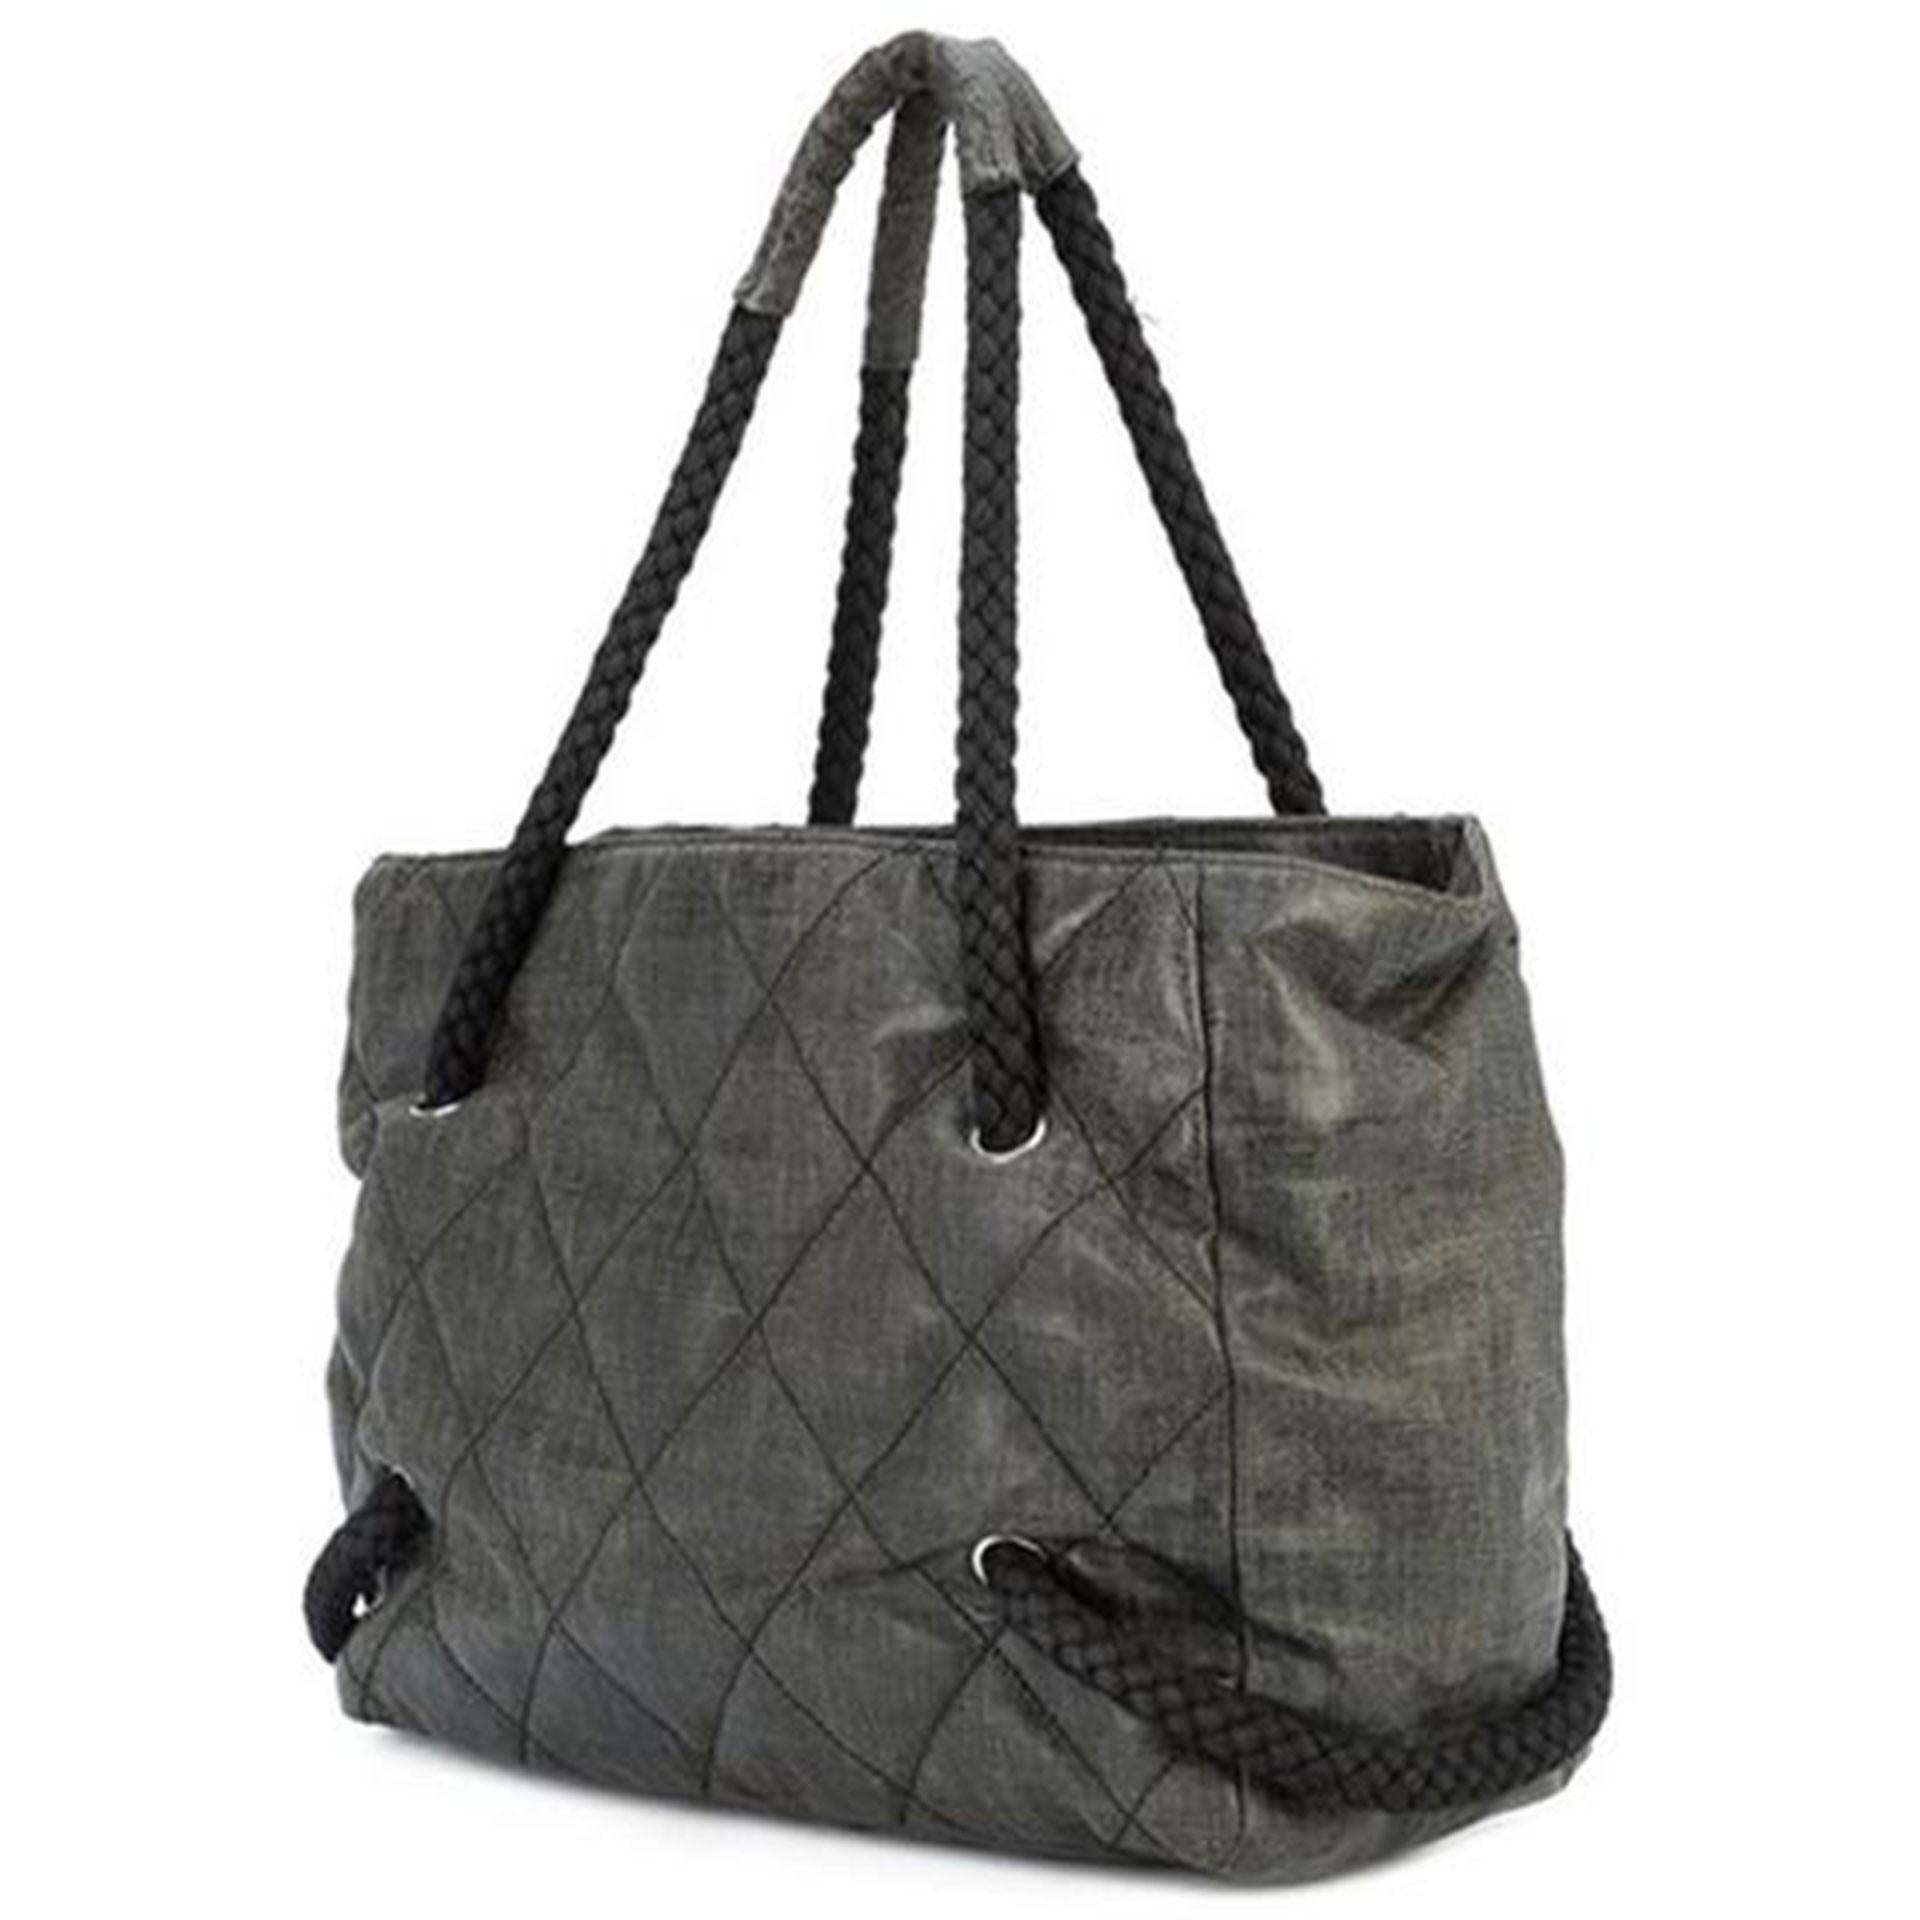 Chanel Rare Limited Edition Cruise Yacht Nautical Beach Black Coated Canvas Tote In Good Condition For Sale In Miami, FL